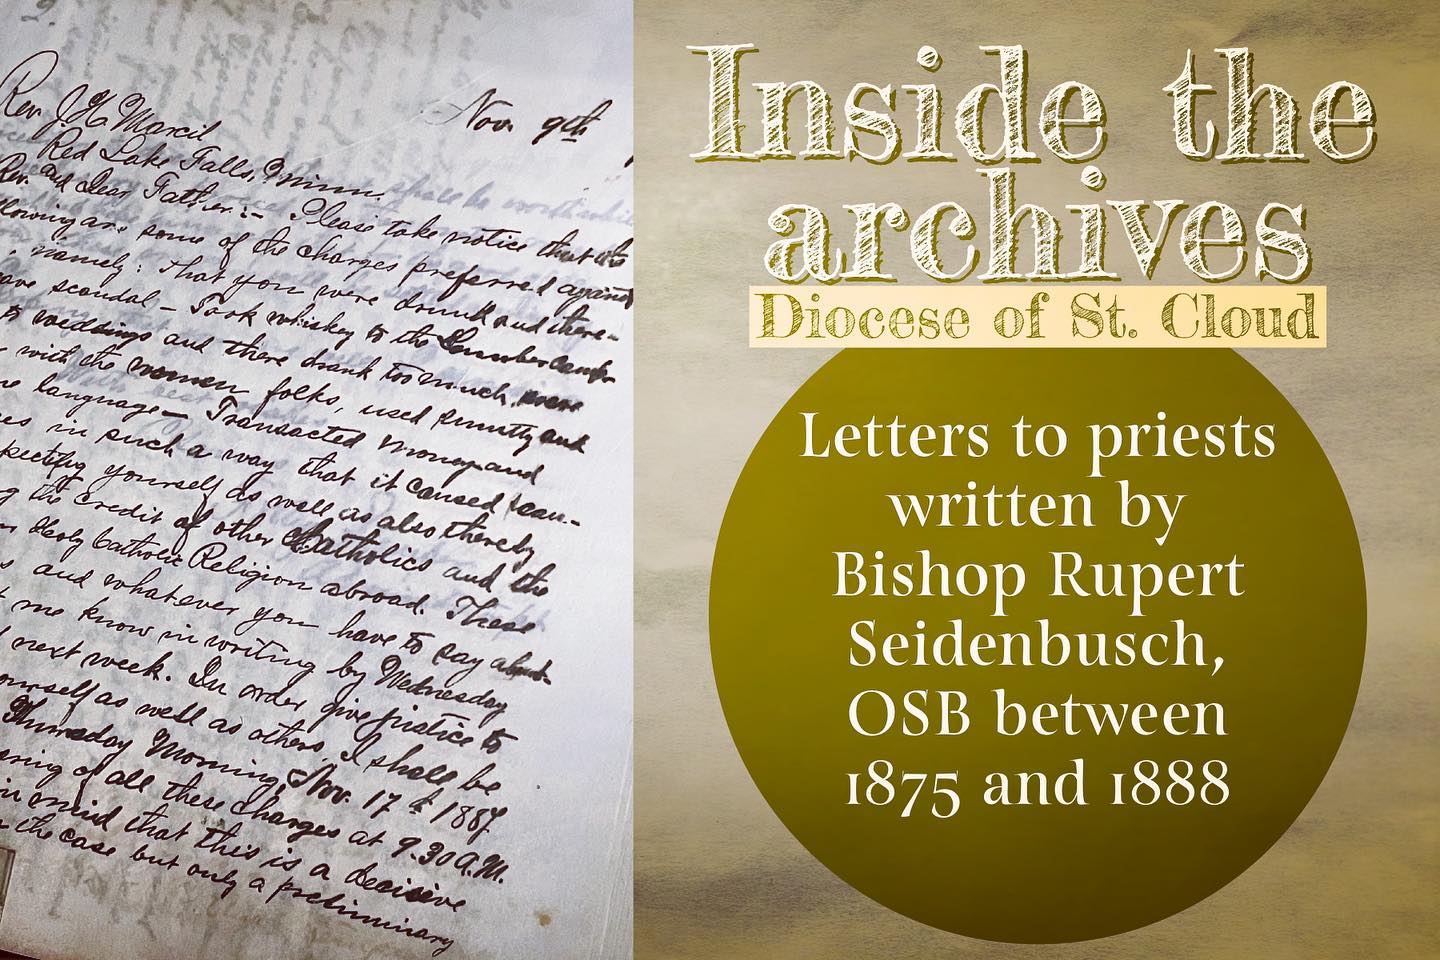 The diocesan archives includes a series of letters written by Bishop Rupert Seidenbusch between 1875 and 1888. In 1866, he was elected the first abbot of St. John’s Abbey in Collegeville and
In 1875 he was appointed Vicar Apostolic of Northern Minnesota (today Diocese of Saint Cloud). In October 1888, he resigned due to serious illness. He died on June 3, 1895 and was buried in the St. John’s Abbey cemetery in Collegeville. #archives #history #catholichistory